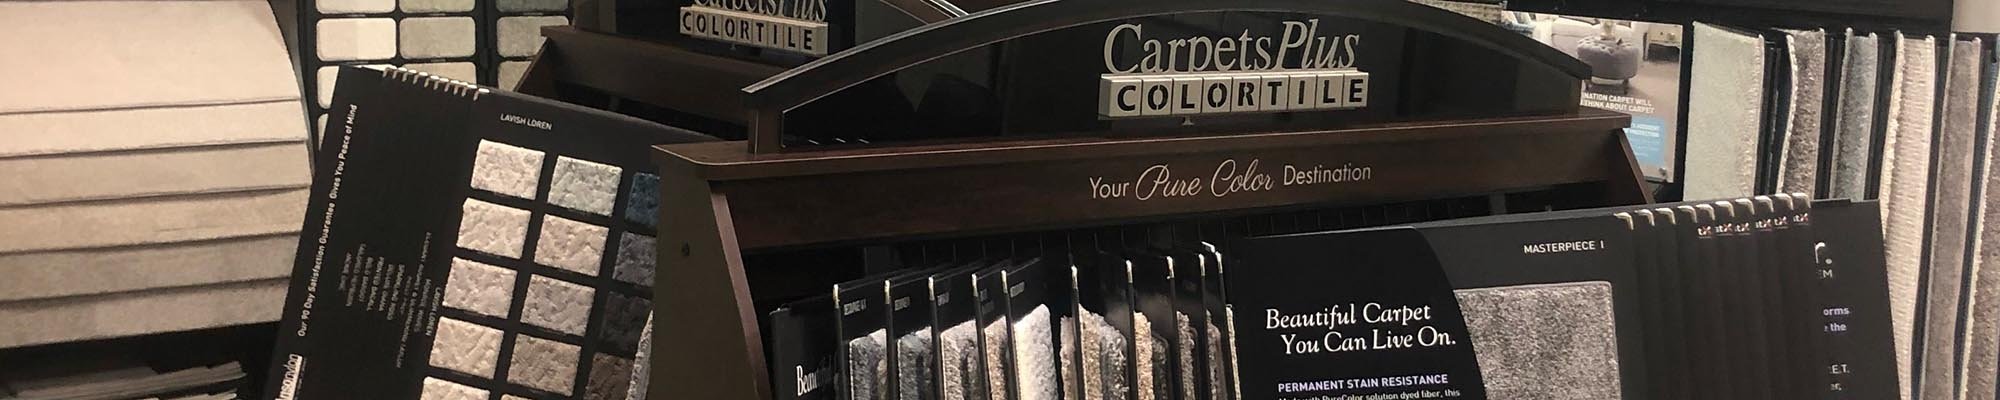 Local Flooring Retailer in St. Louis, MO  - CarpetsPlus of St. Louis providing a wide selection of flooring and expert advice.